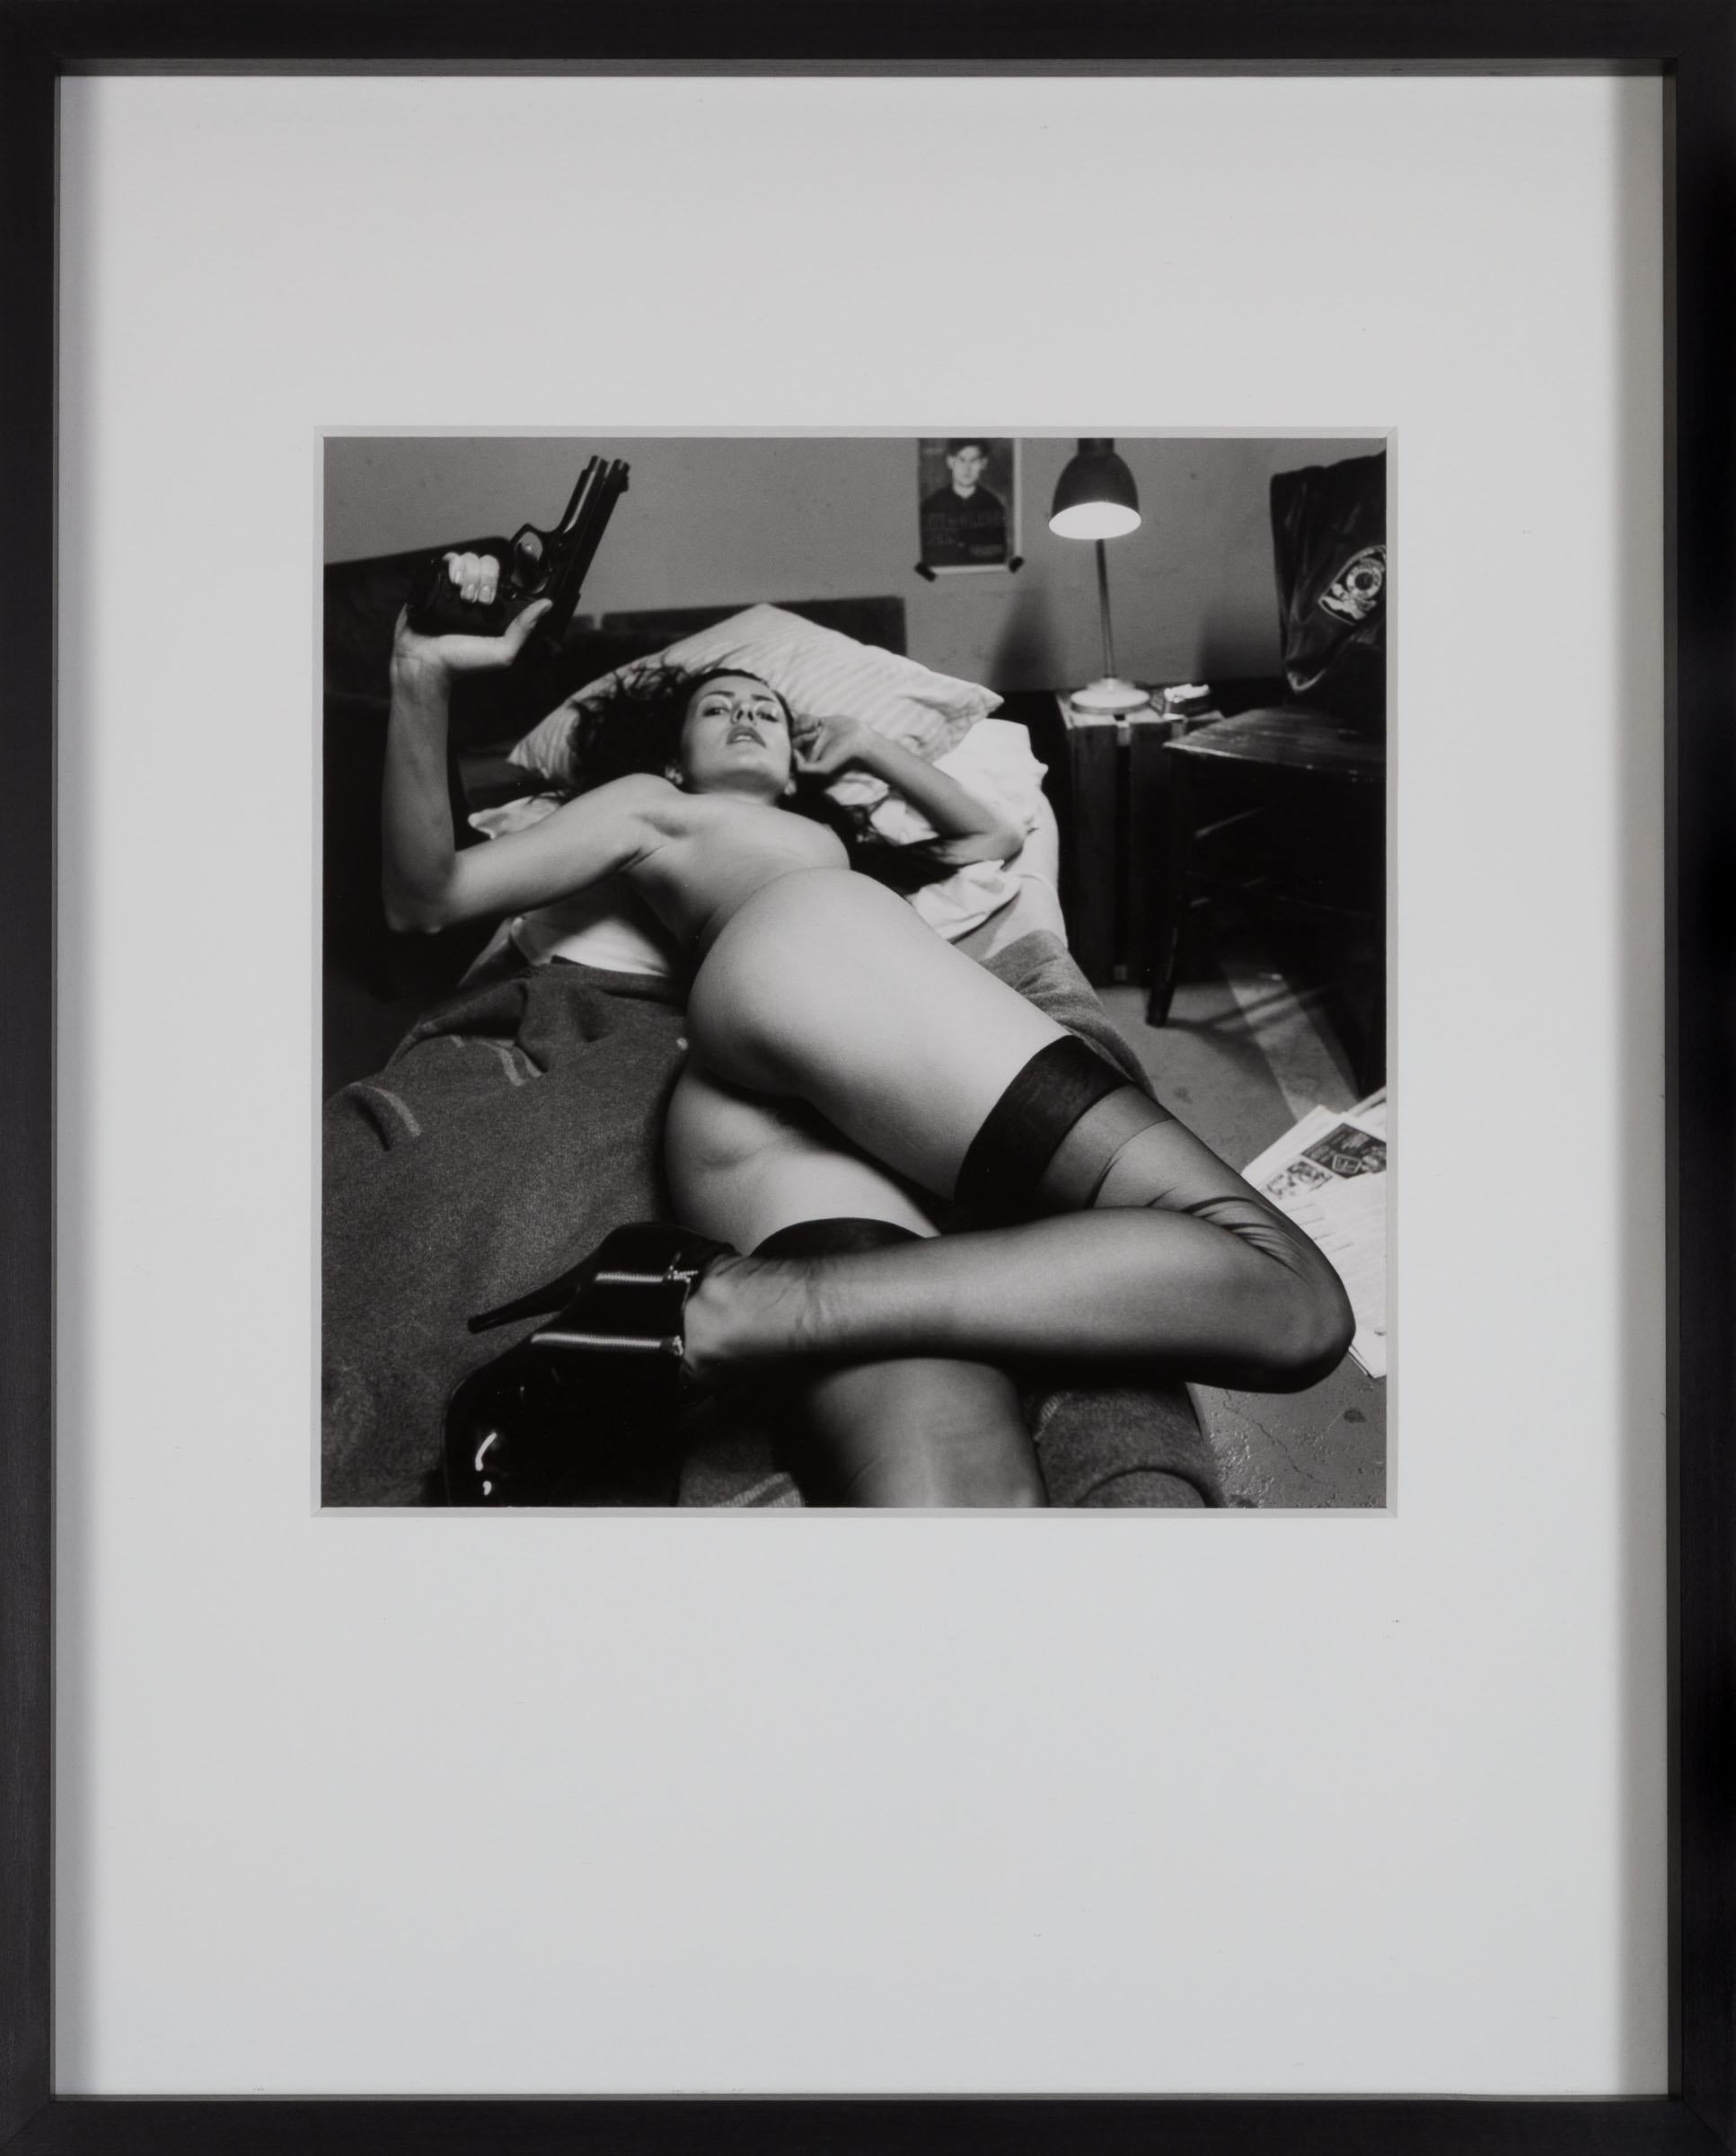 Woman on a Level Four, Monte Carlo Gelatin Silver Print, Black&White Photography For Sale 3